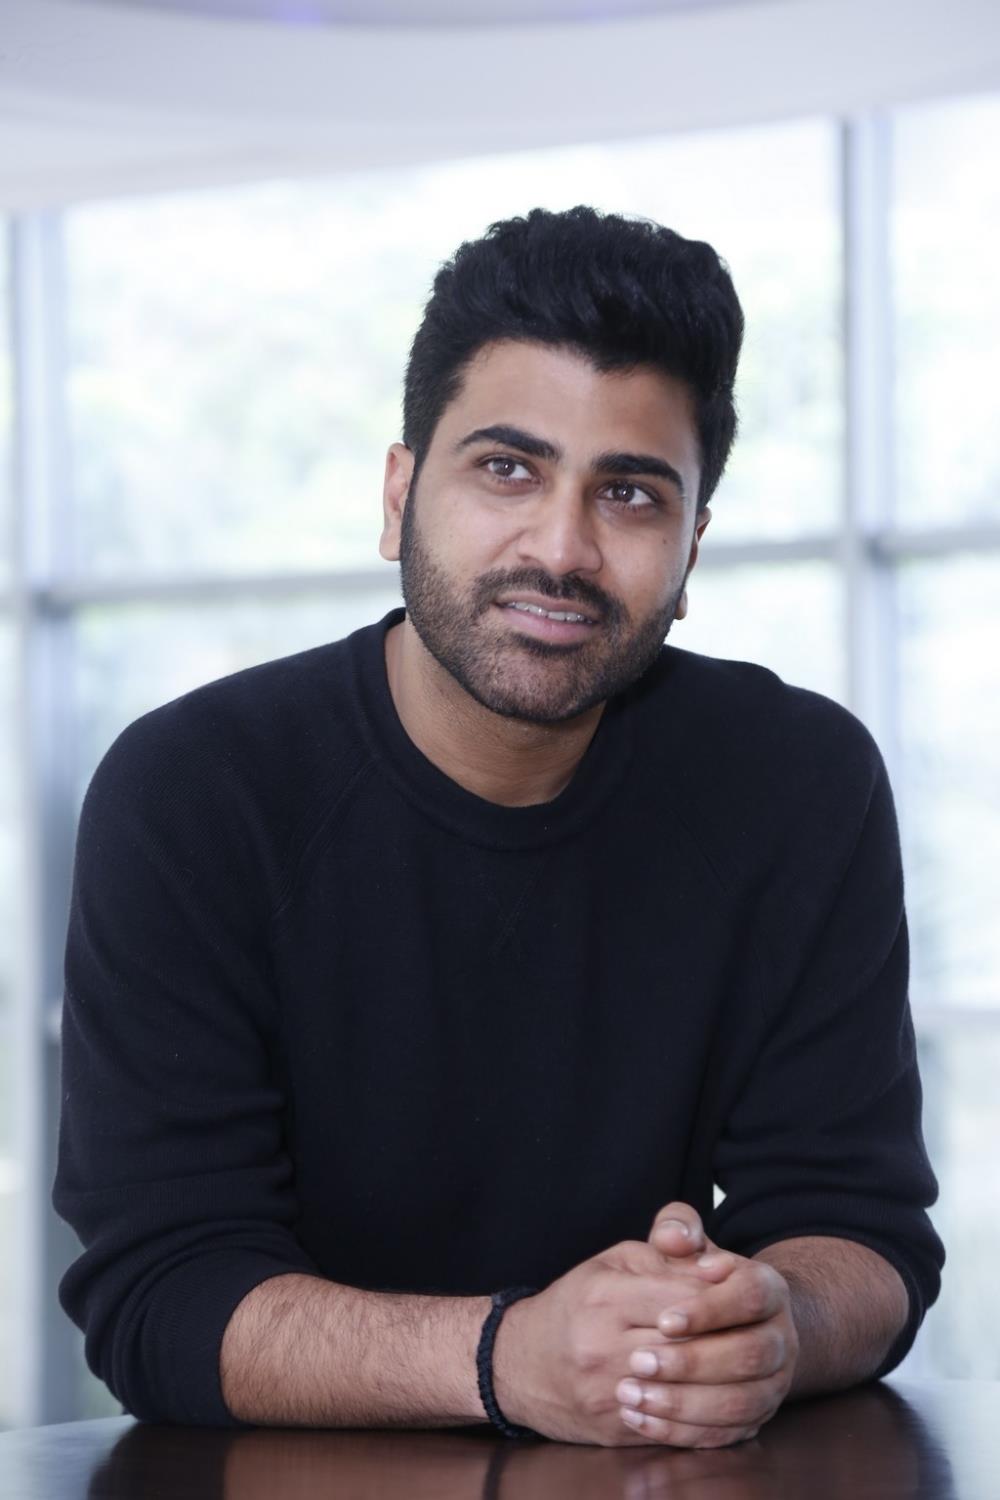  Telugu Actor Sharwanand Is 'Safe And Sound' After A 'Minor' Car Accident 